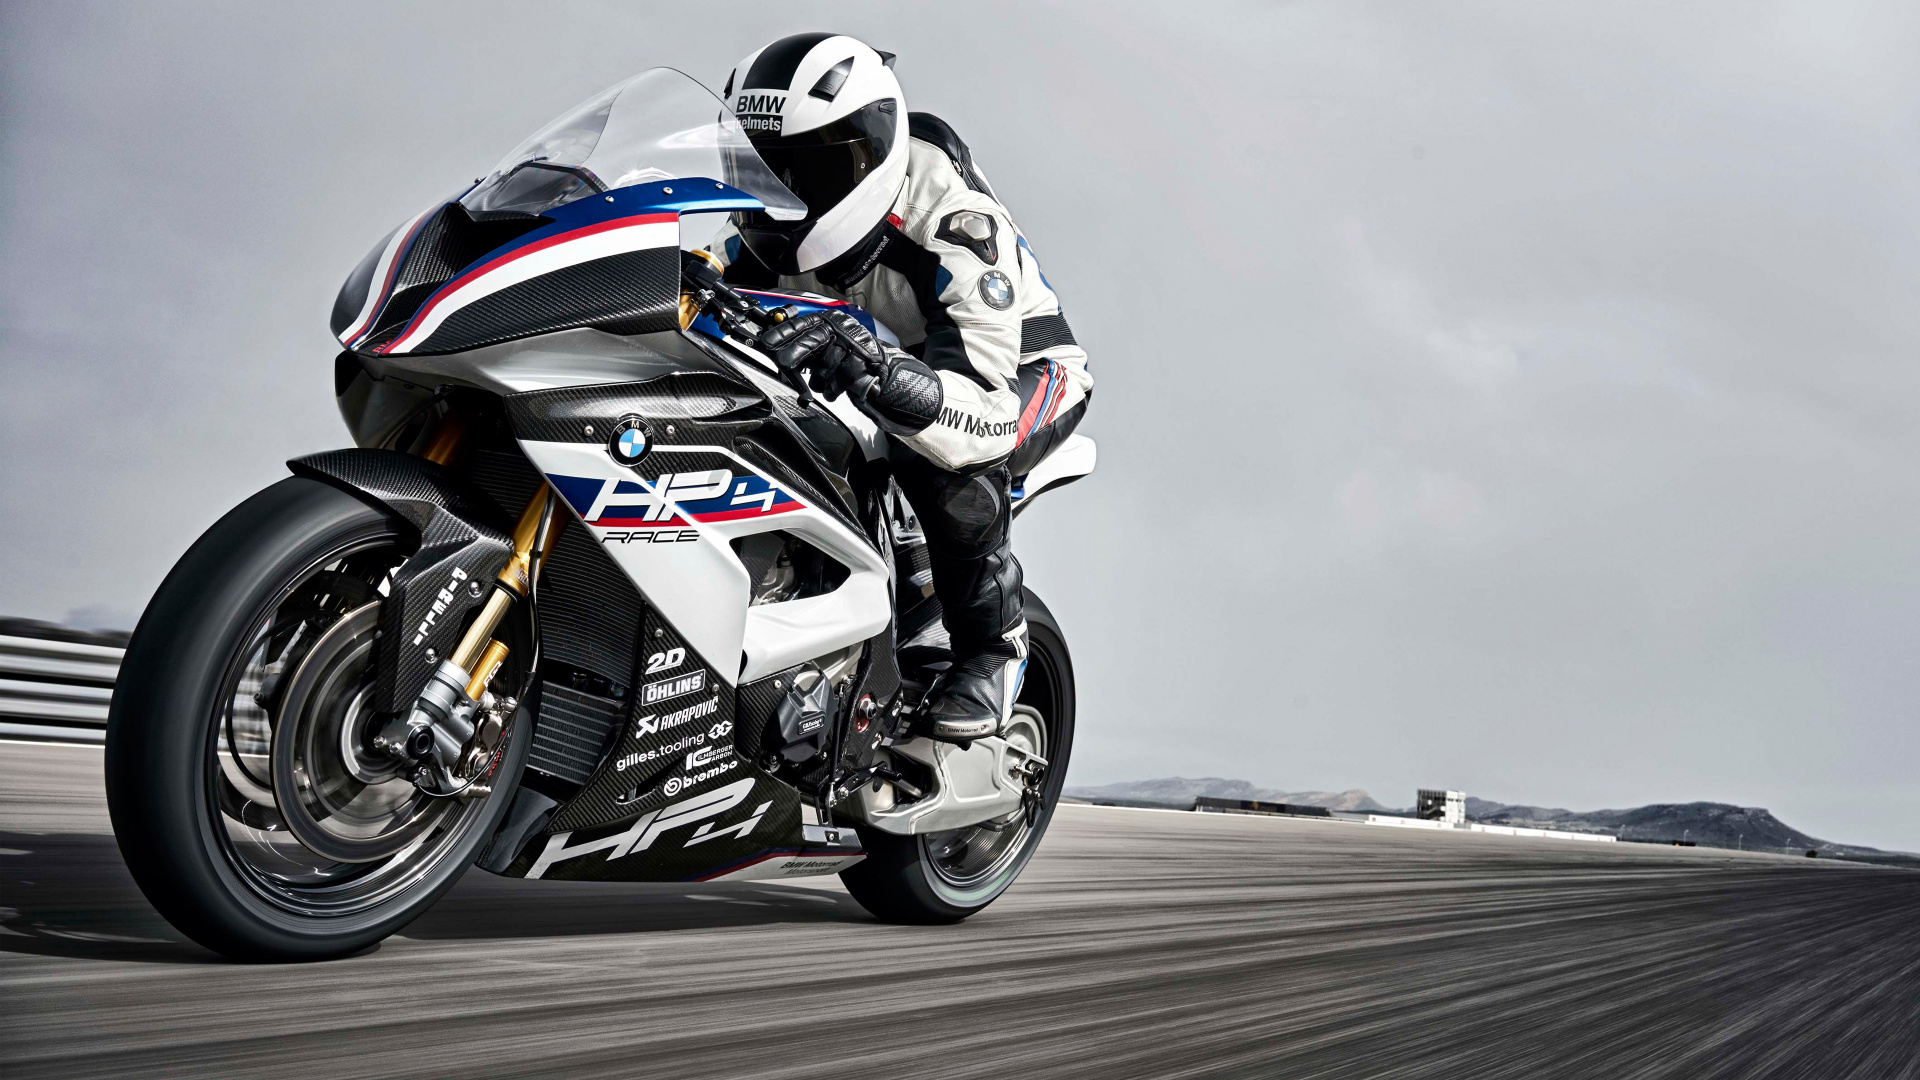 Man in Black and White Motorcycle Suit Riding on Black and White Sports Bike. Wallpaper in 1920x1080 Resolution